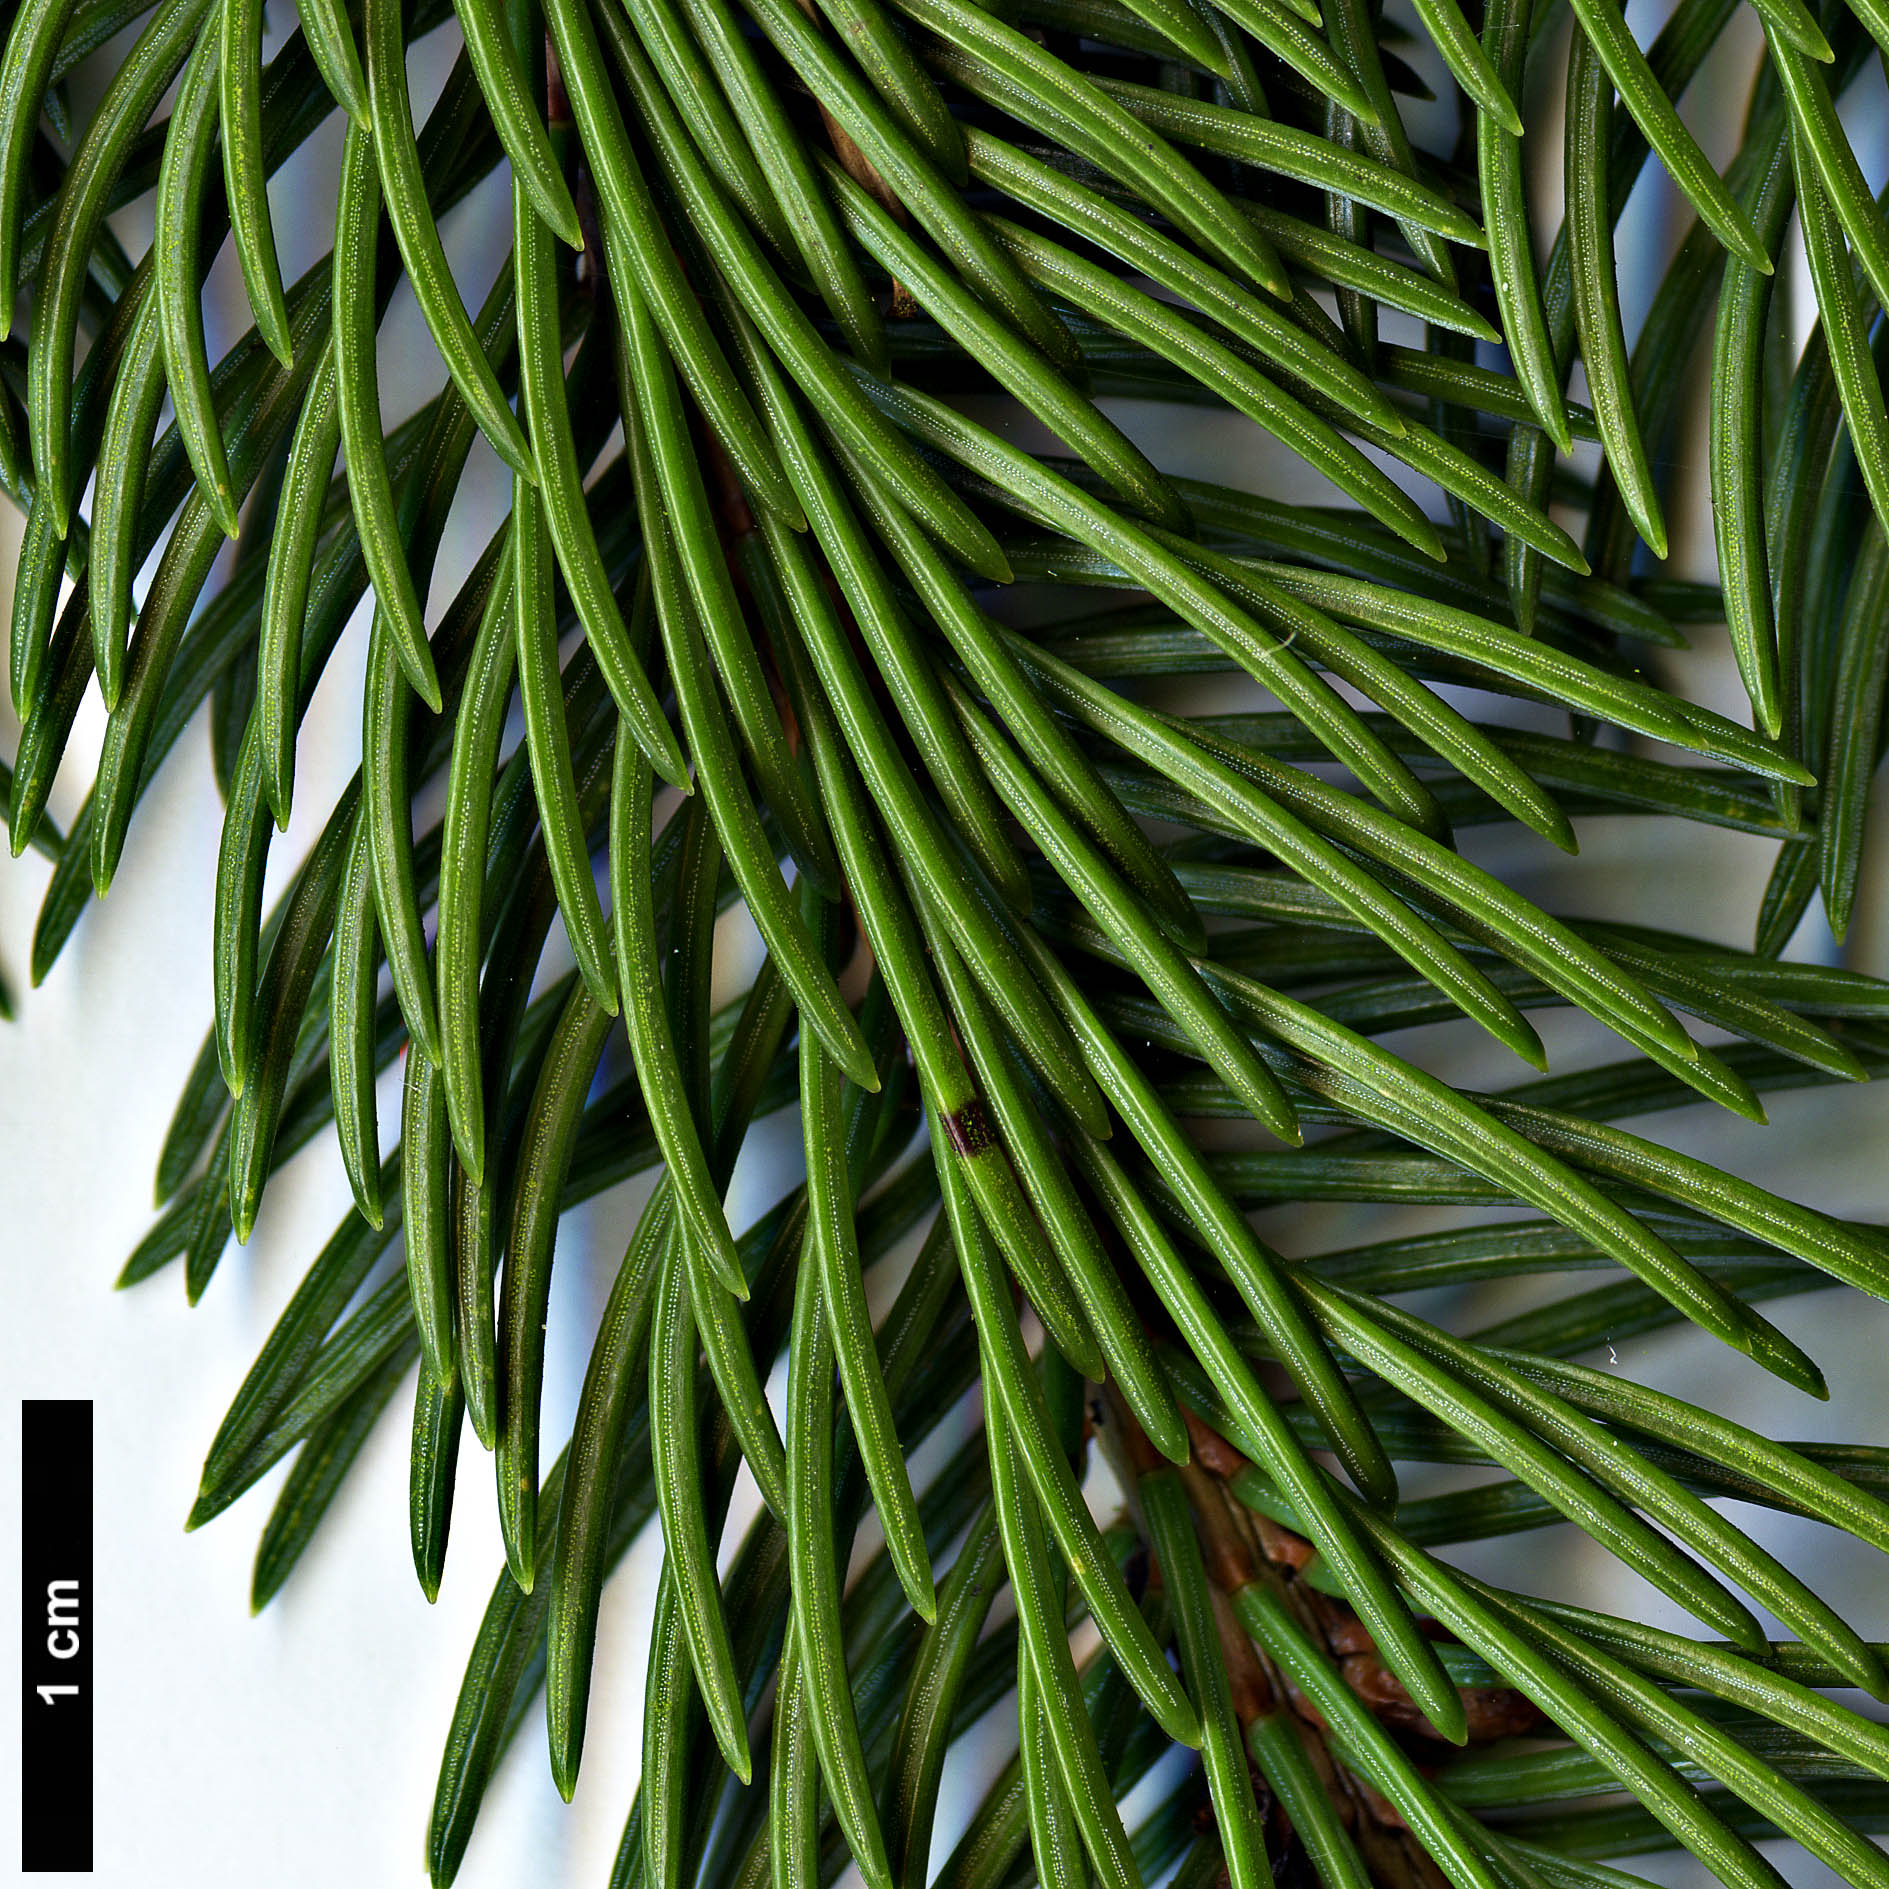 High resolution image: Family: Pinaceae - Genus: Picea - Taxon: ×lutzii (P.glauca × P.sitchensis)